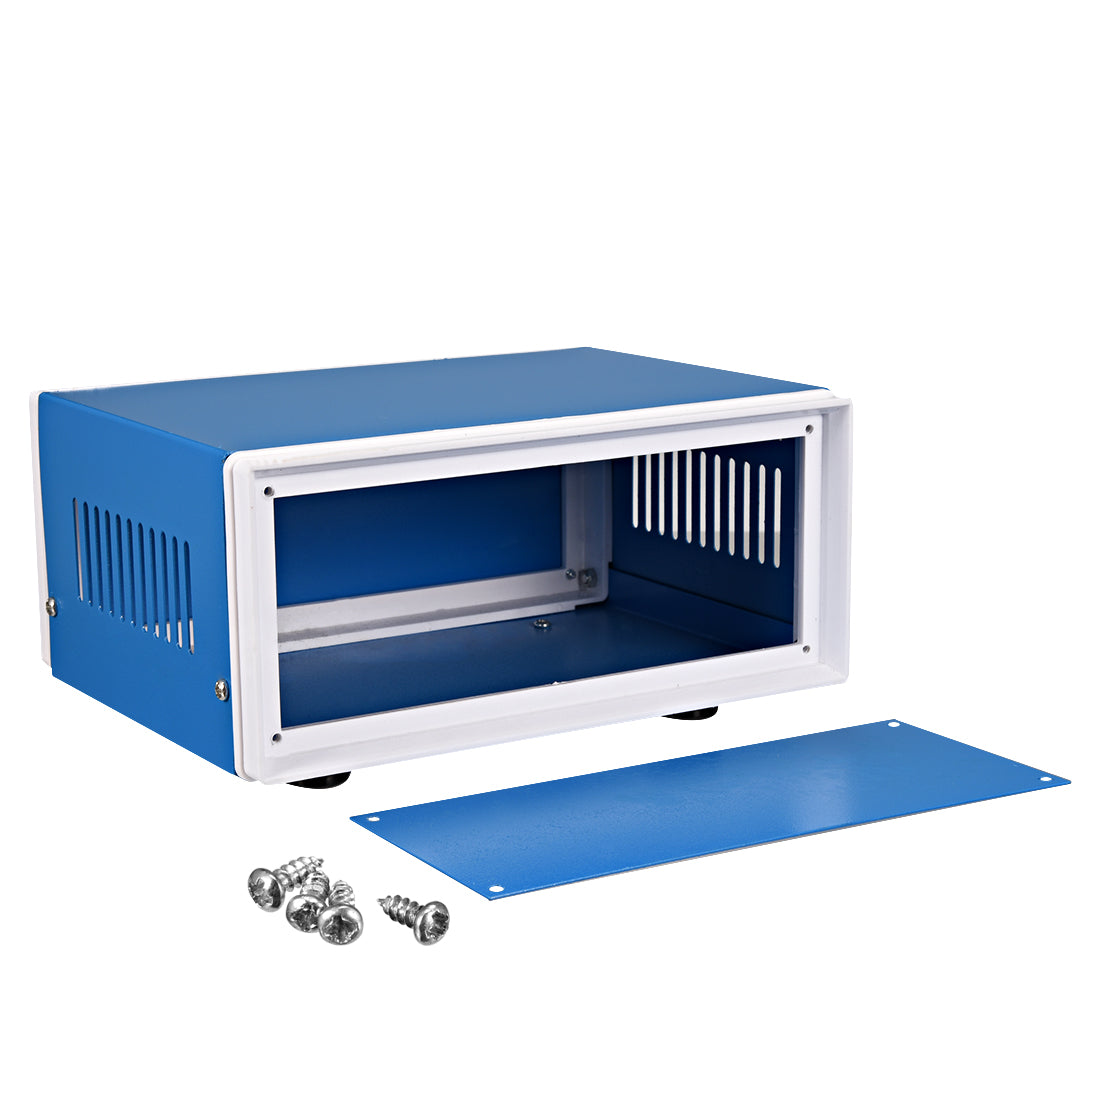 uxcell Uxcell Metal Blue Project Junction Box Enclosure Case 200 x 165 x 90mm/7.87 x 6.5 x 3.54inch